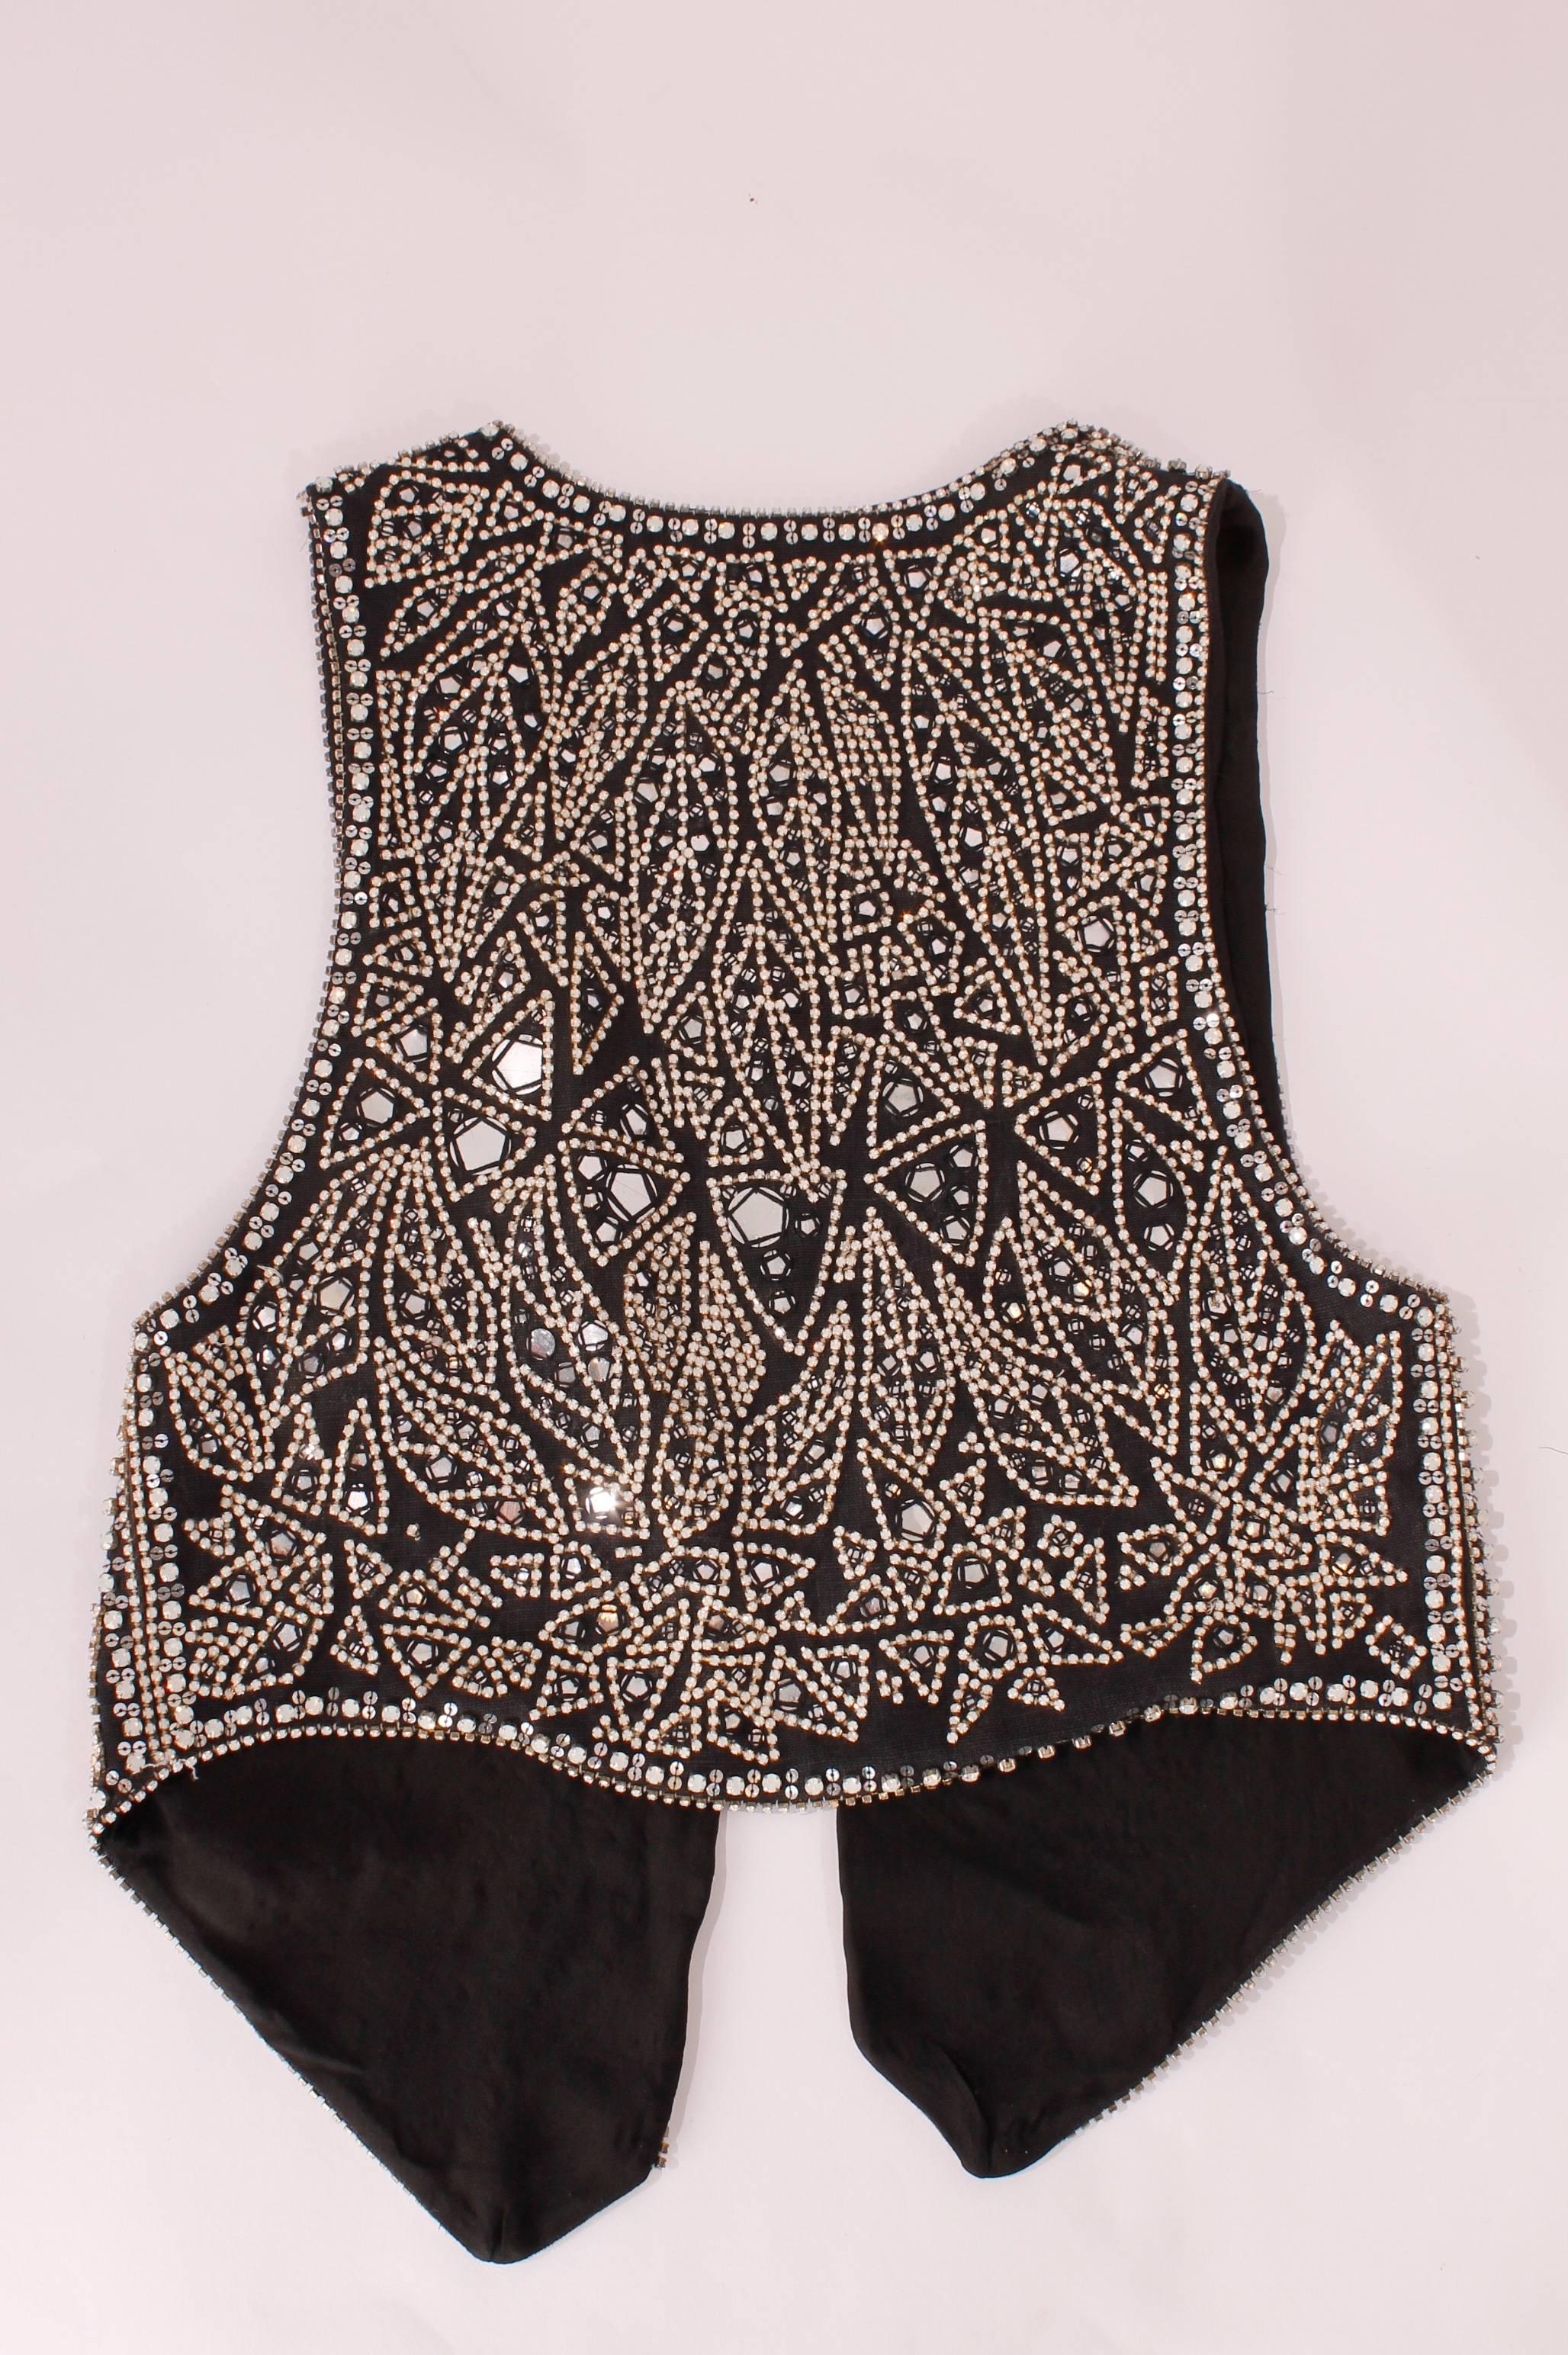 Black linen vest with a white and silver stone studded design. 

French size 38

Never worn